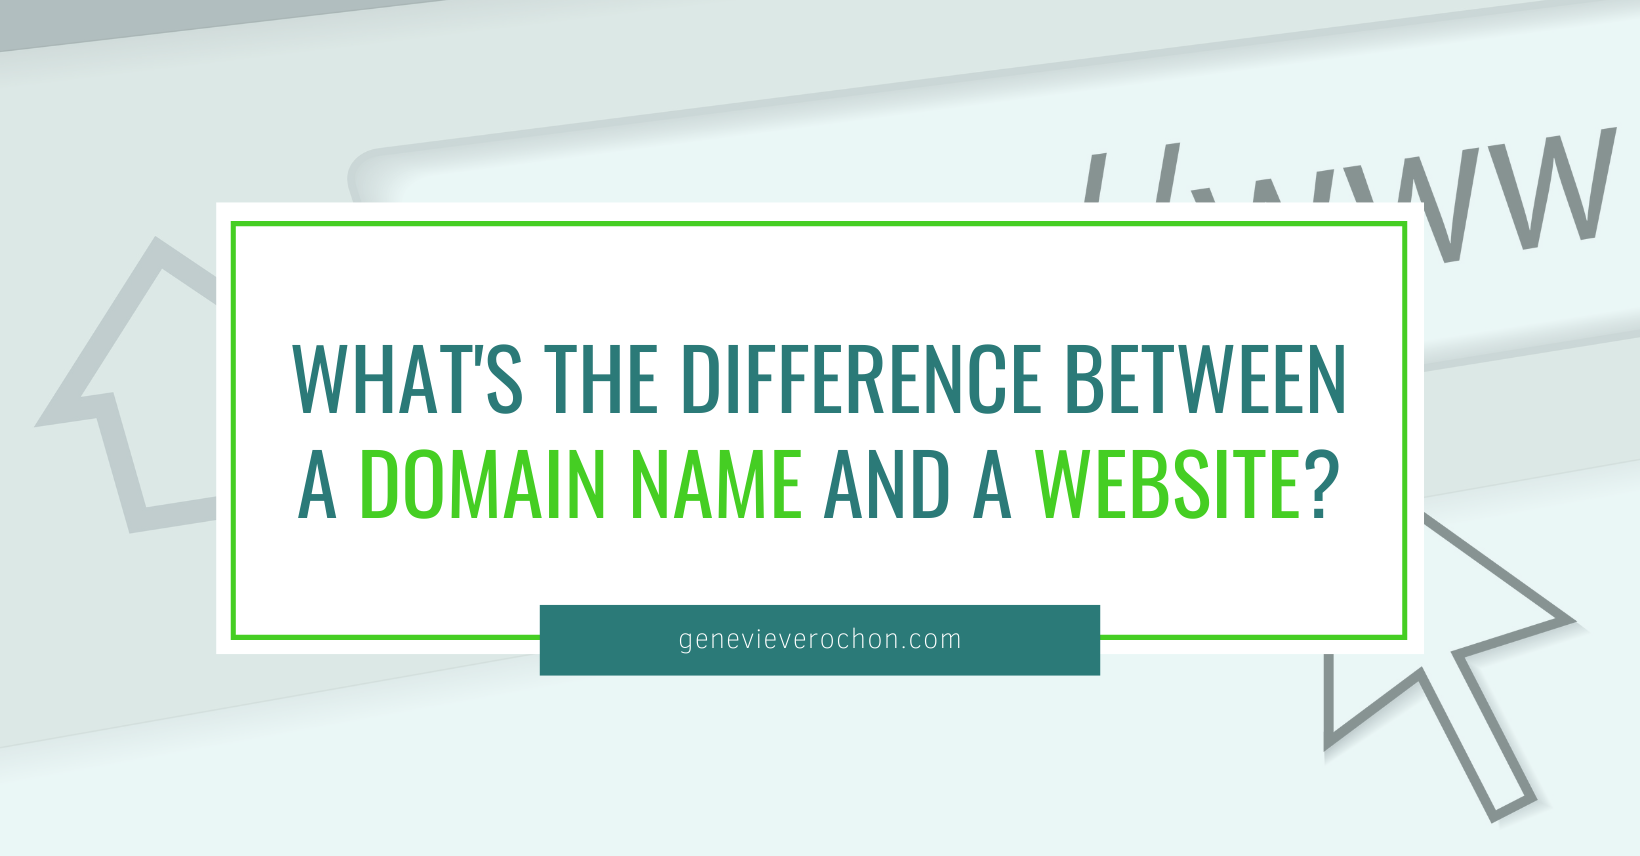 what's the difference between a domain name and website